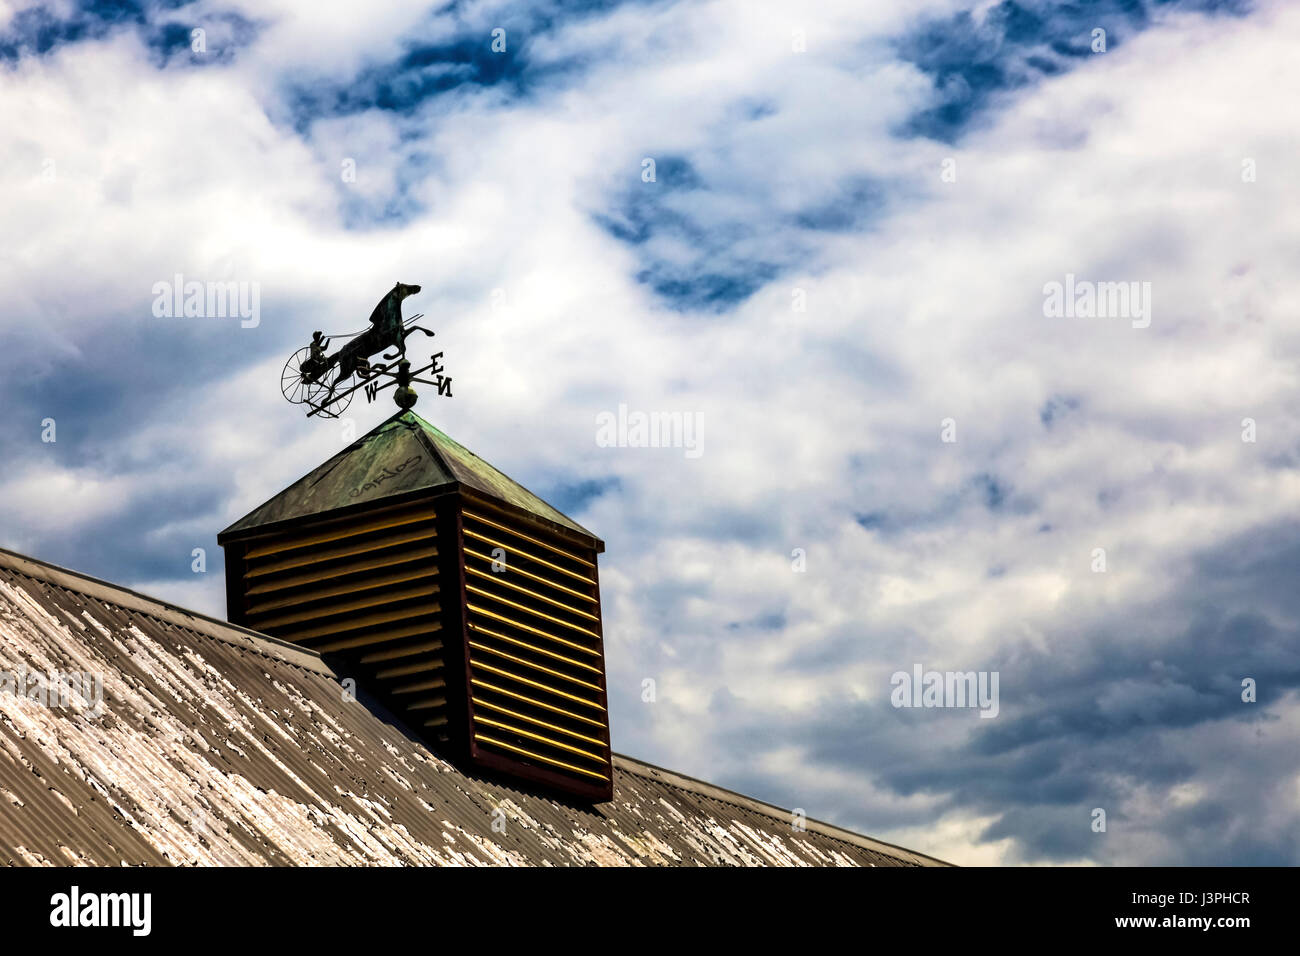 Wweather vane on roof of house against the clouds Stock Photo